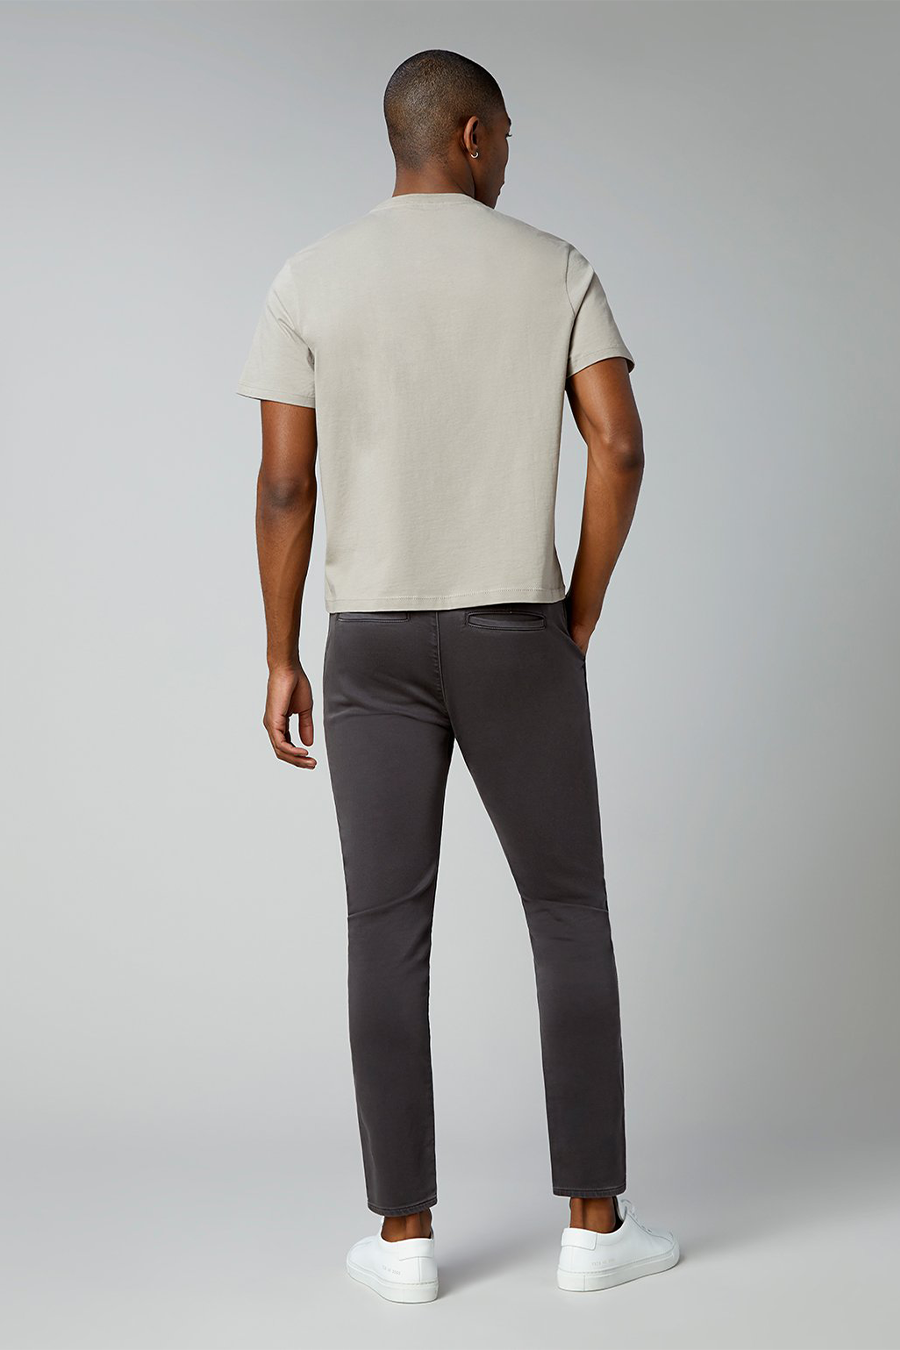 Jay Knit Track Chino | Dewey Stripe - Main Image Number 3 of 4